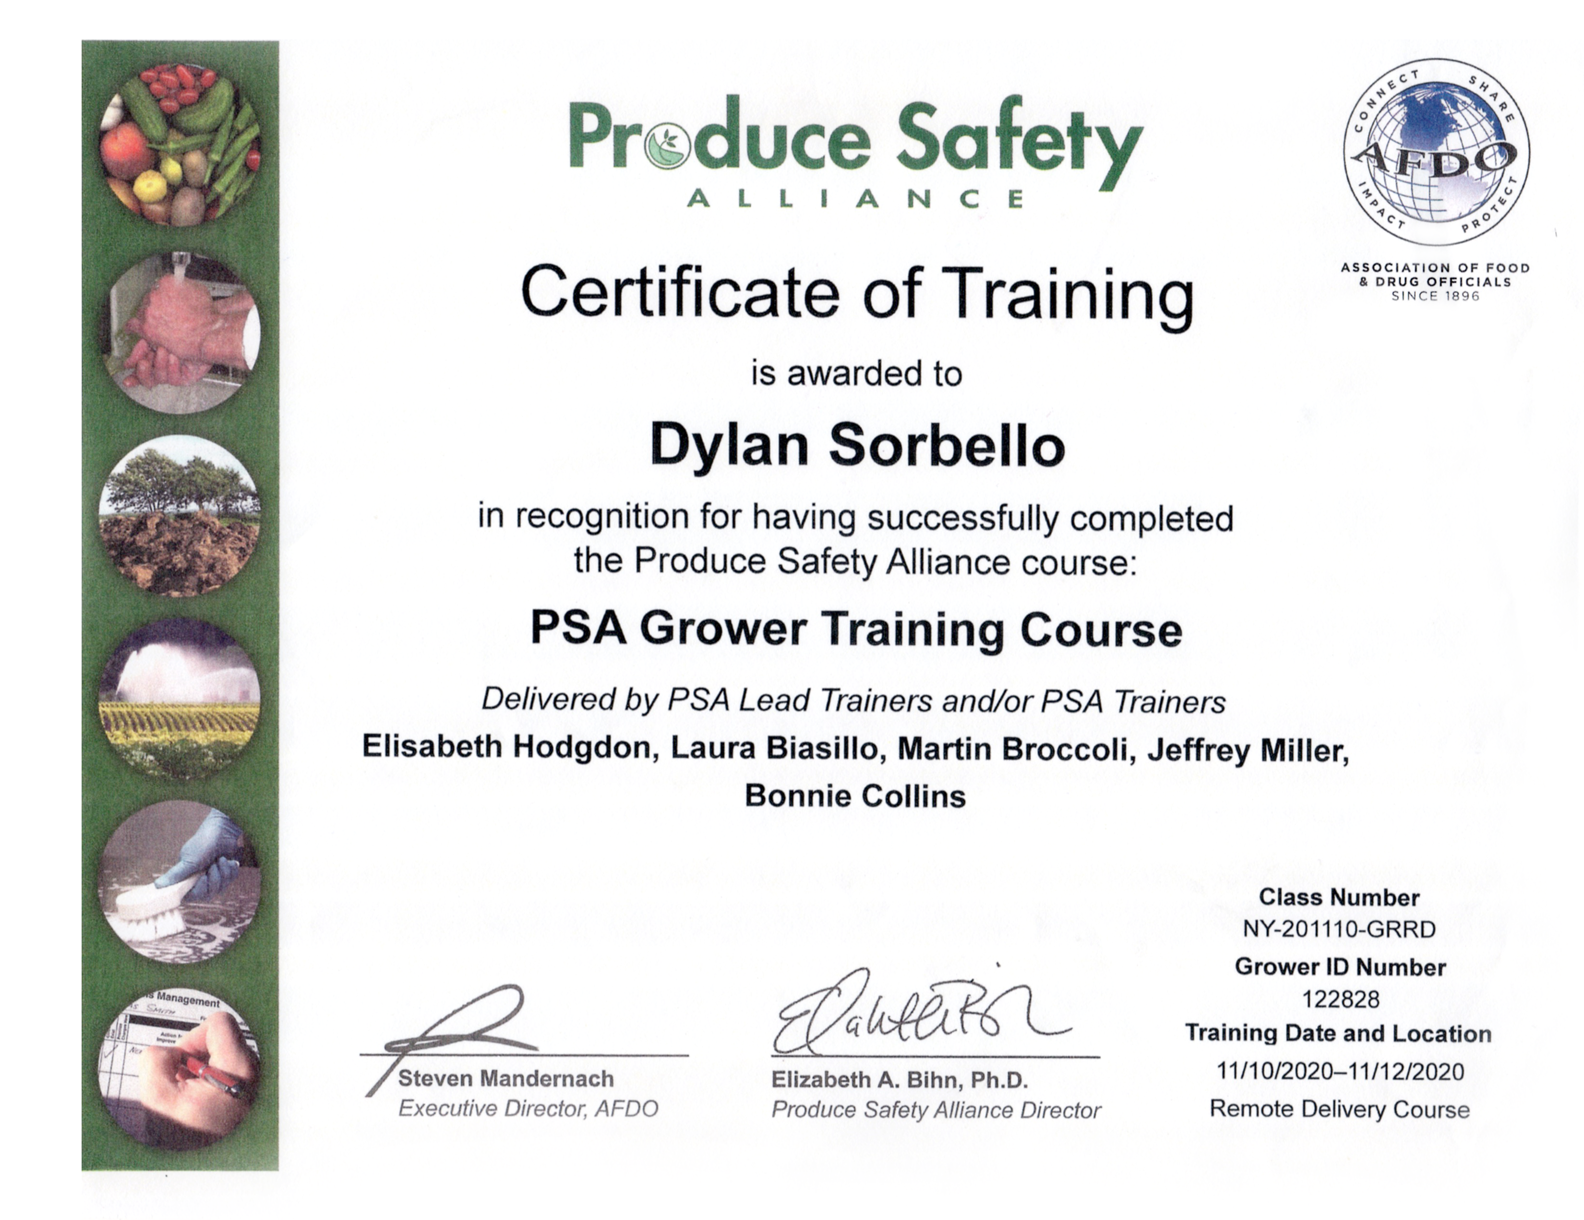 PSA - Certificate of Training - is awarded to Dylan Sorbello in recognition for having successfully completed the Produce Safety Alliance course. Delivered by PSA Lead Trainers and/or PSA Trainers Elisabeth Hodgdon, Laura Biasillo, Martin Broccoli, Jeffrey Miller and Bonnie Collins. AFDO - Association of Food and Drug Officials. Steven Mandernach, Executive Director, Elizabeth A. Bihn, Ph.D., Produce Safety Alliance Director. Dated November 10 through November 12, 2020. Remote Course Delivery. Grower ID Number 122828. Class Number NY-2-1110-GRRD